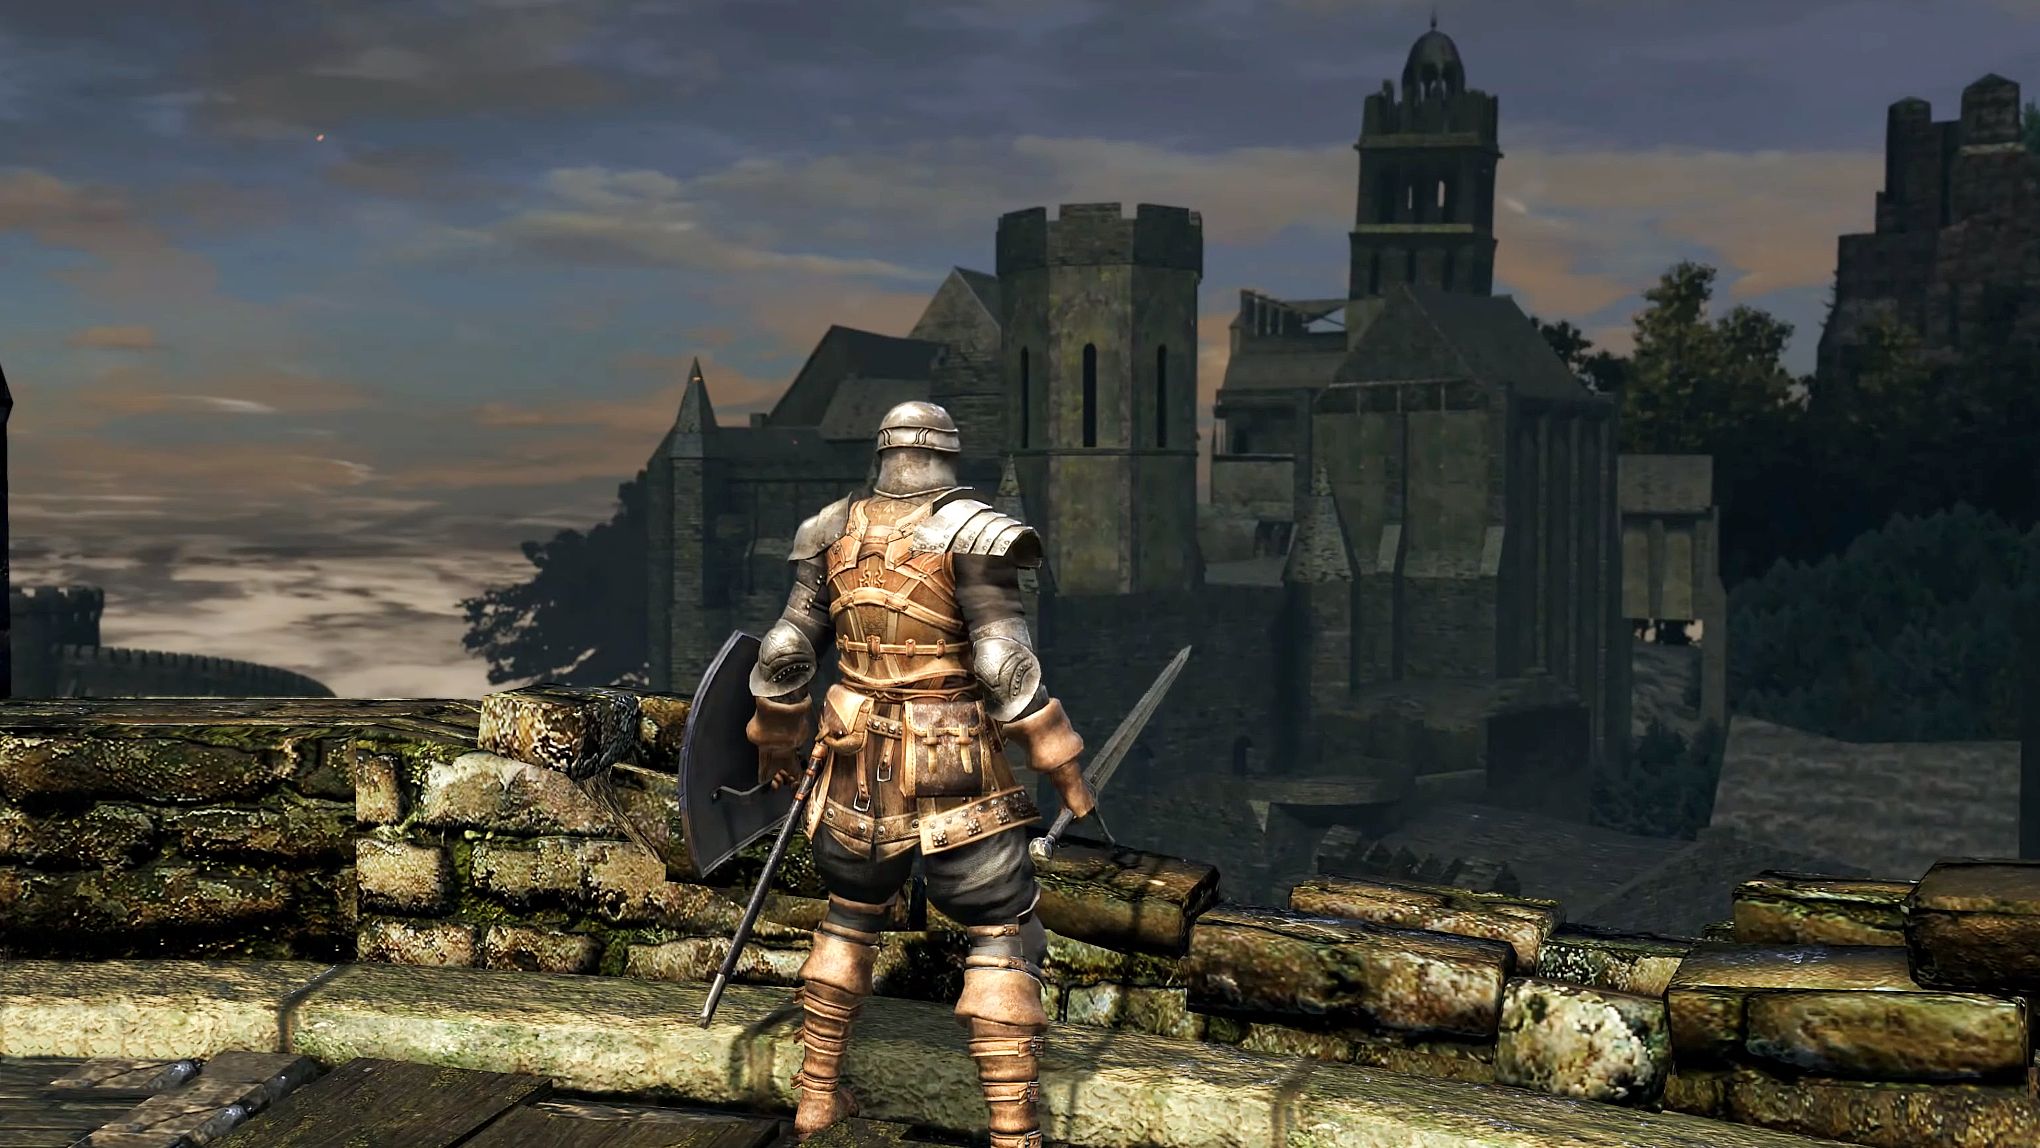 Dark Souls diary: Undead Burg’s level design is still unmatched